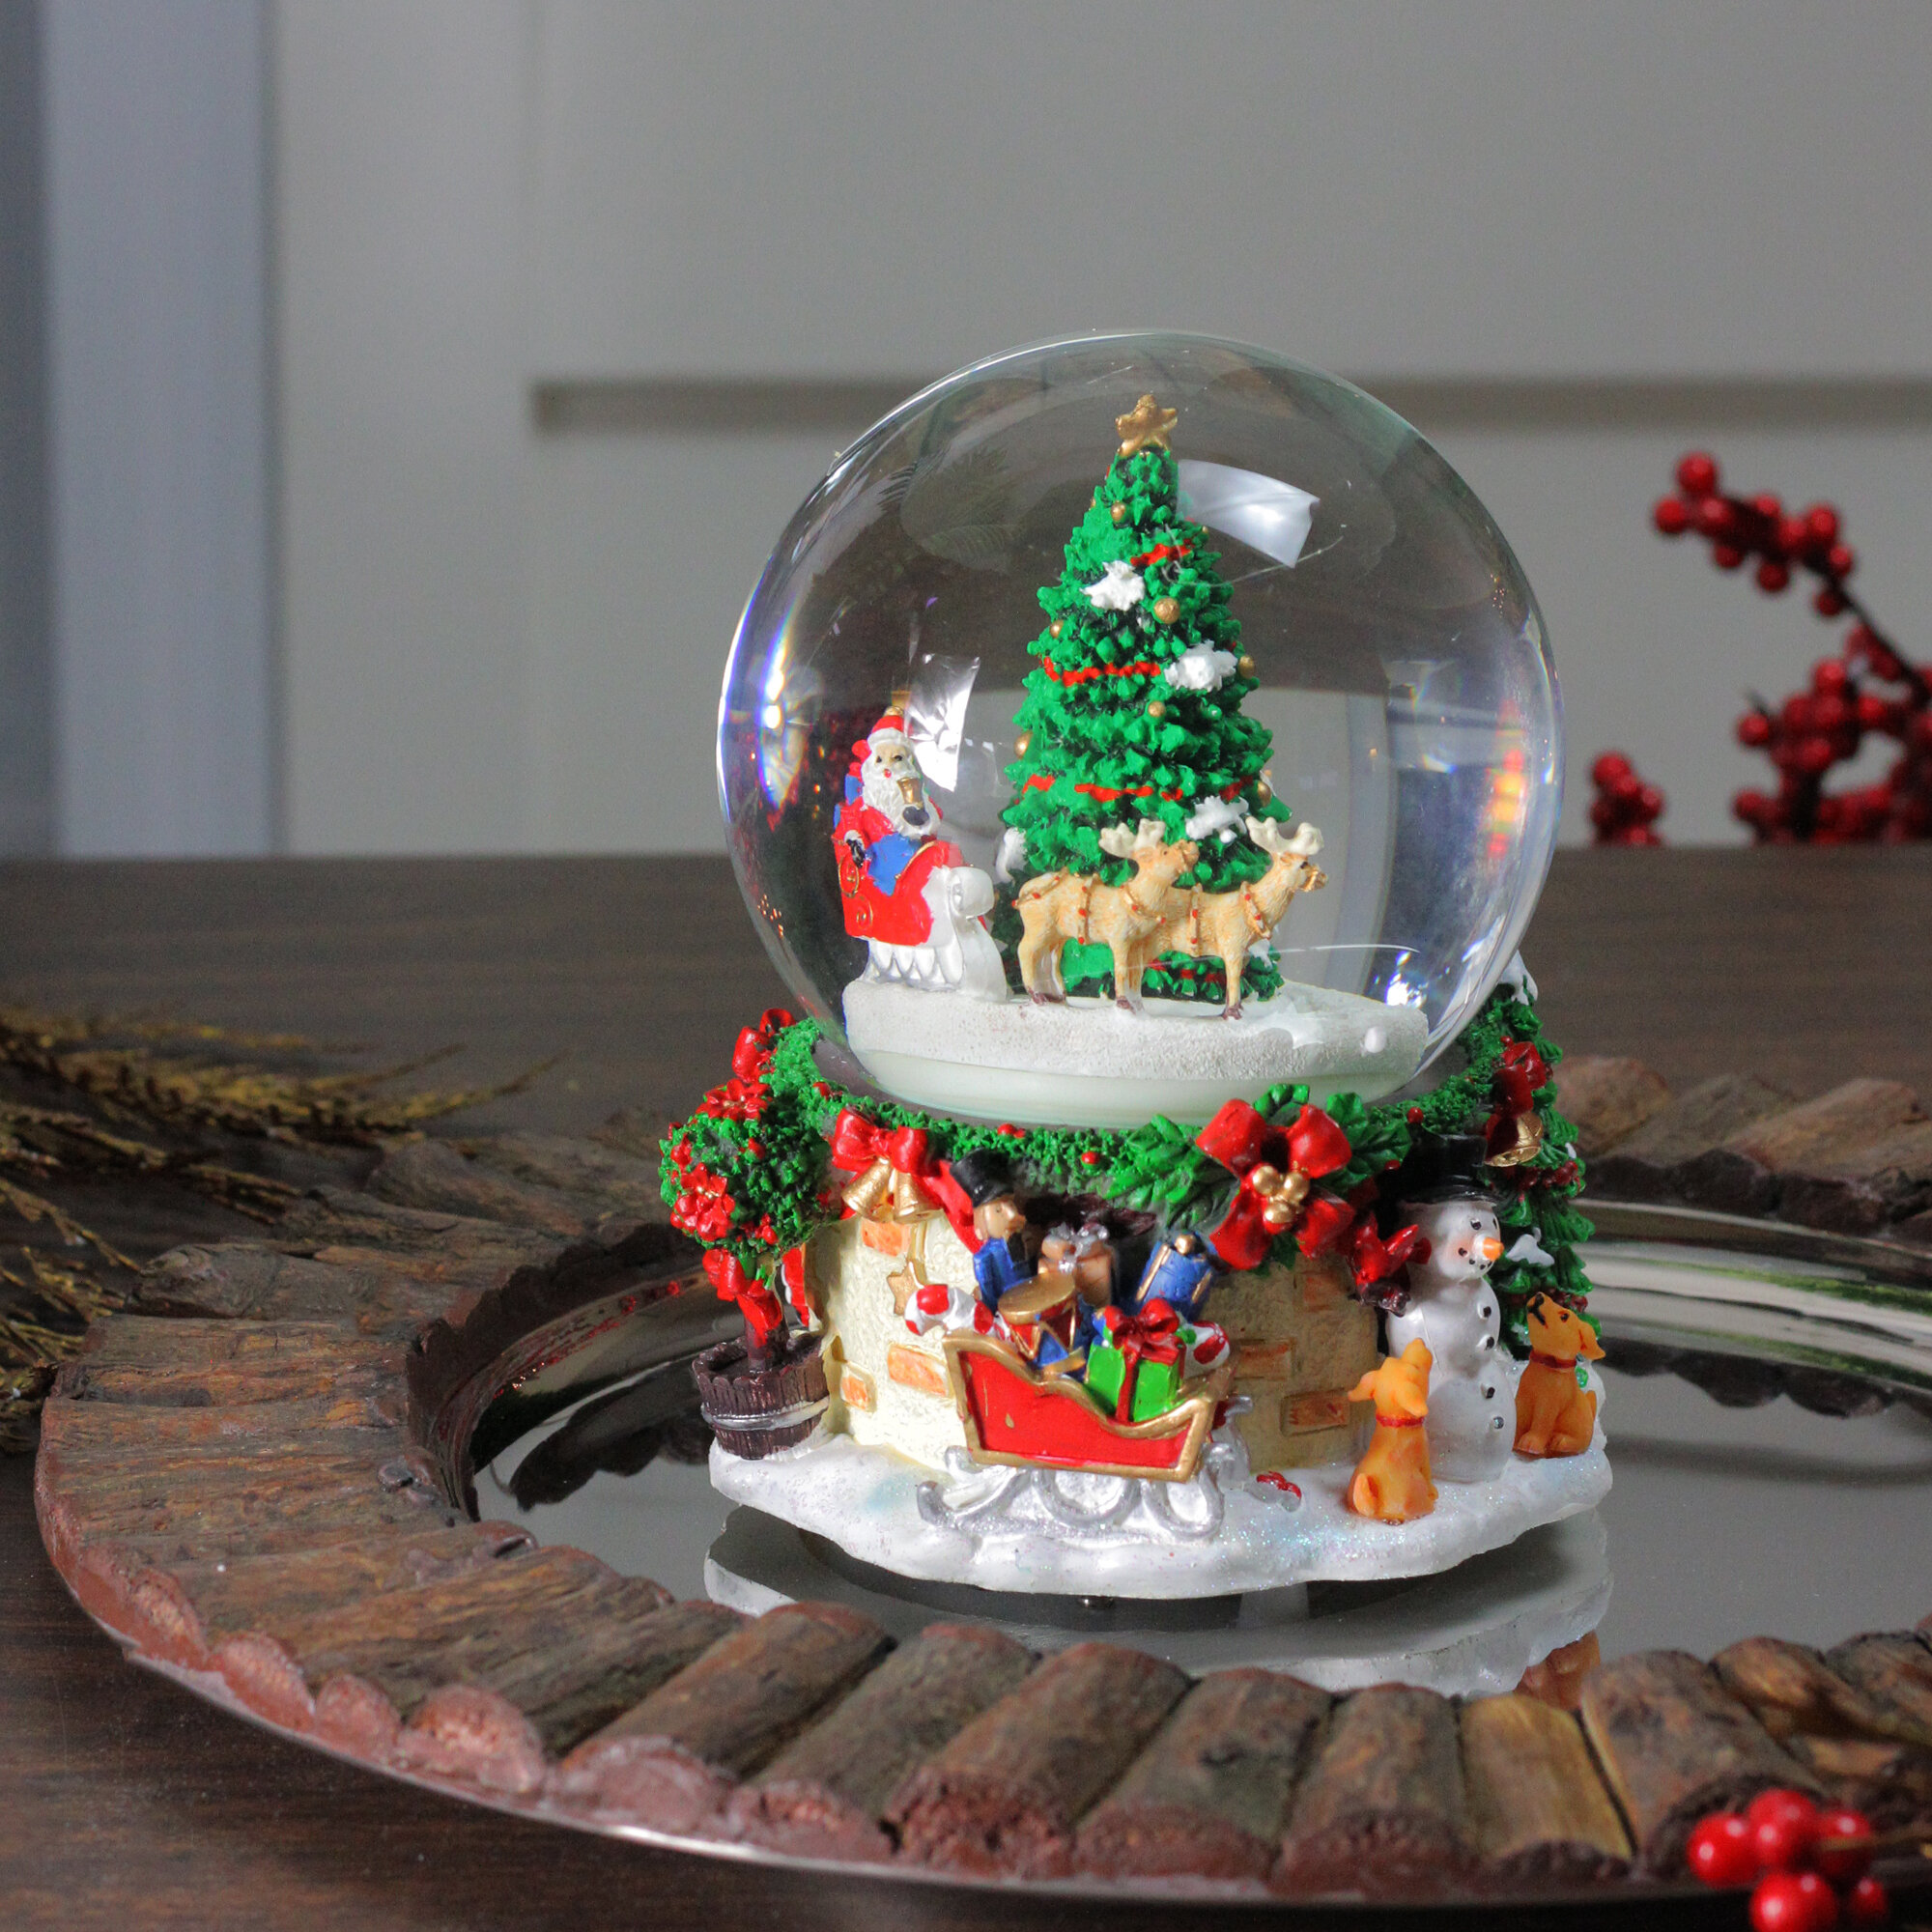 Snowman with Santa 31cm Tall tinsel time LED Musical Santa/Snowman Figure Snow Globe with Festive Scene Battery or Mains Operated Water Filled with Glittering Effect 